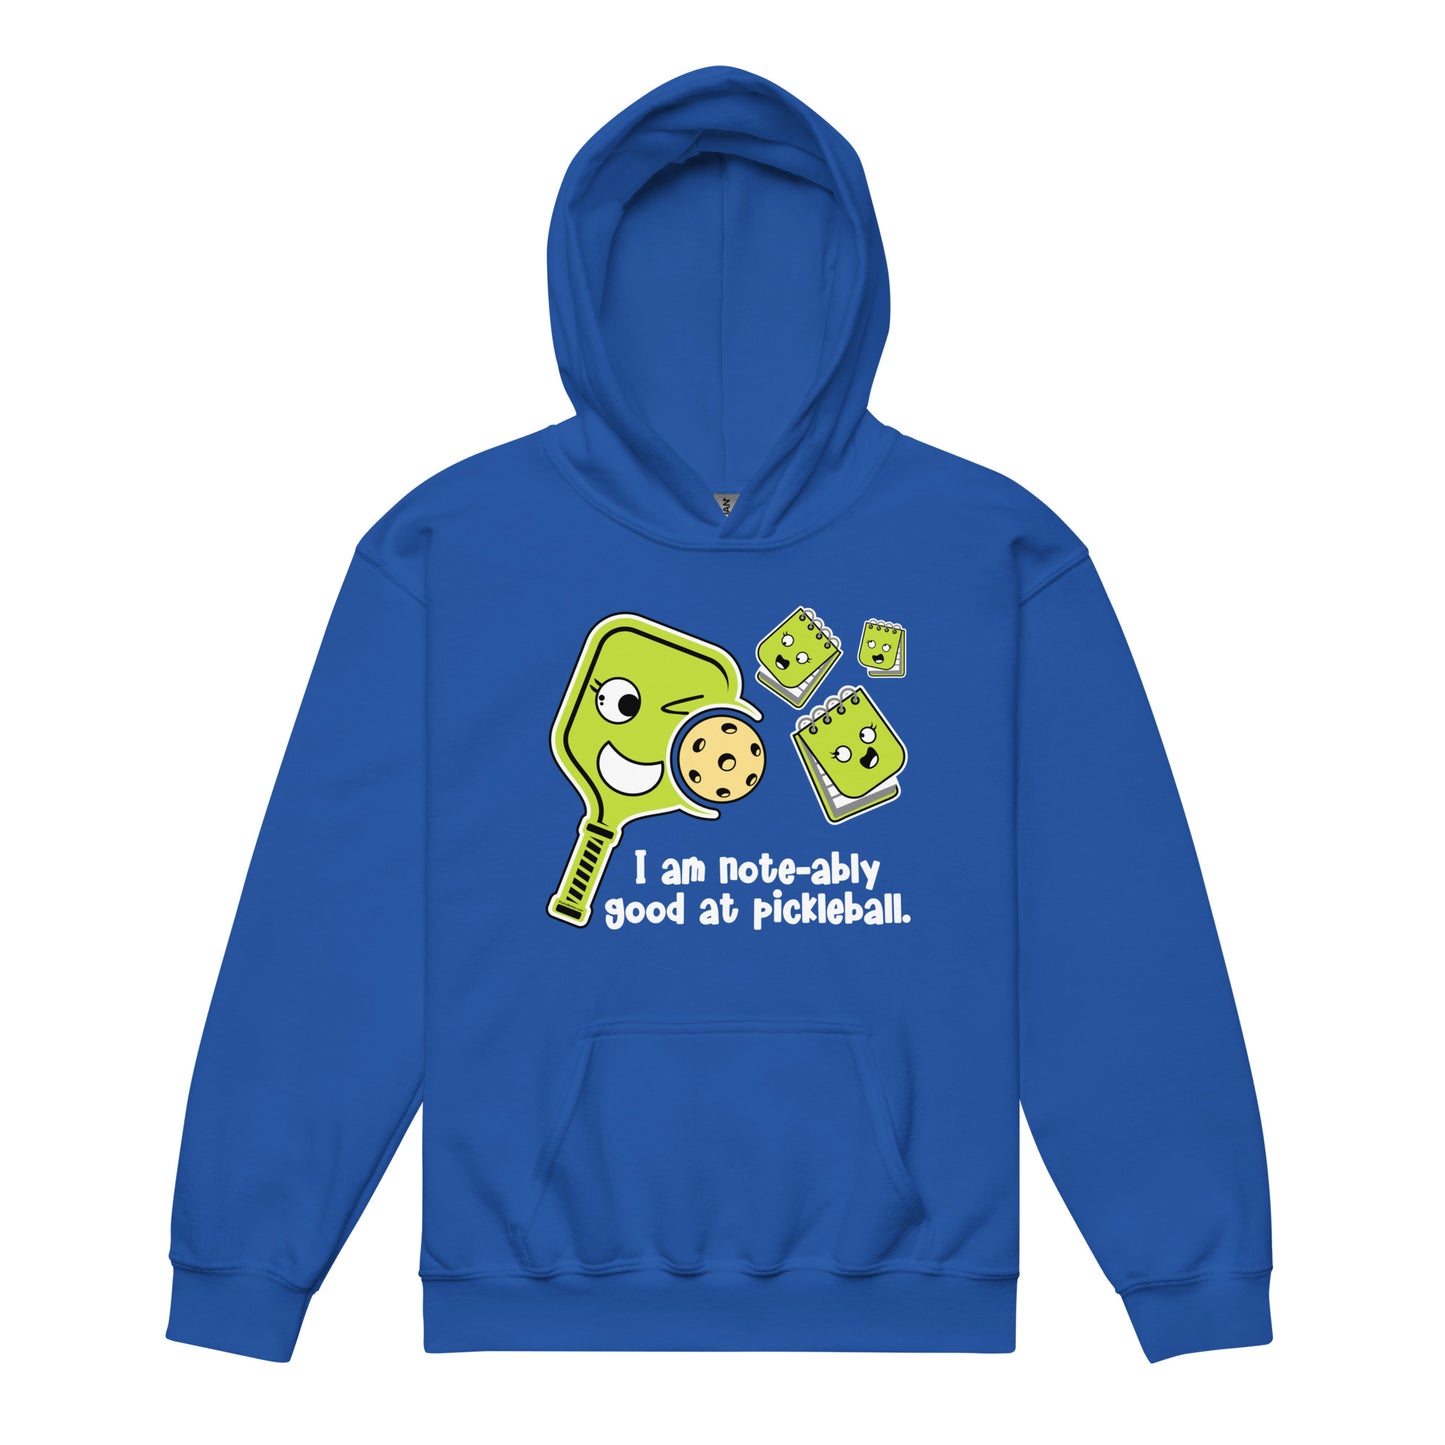 Fun Pickleball Pun: "I Am Note-Ably Good At Pickleball" Youth Heavy Blend Hoodie